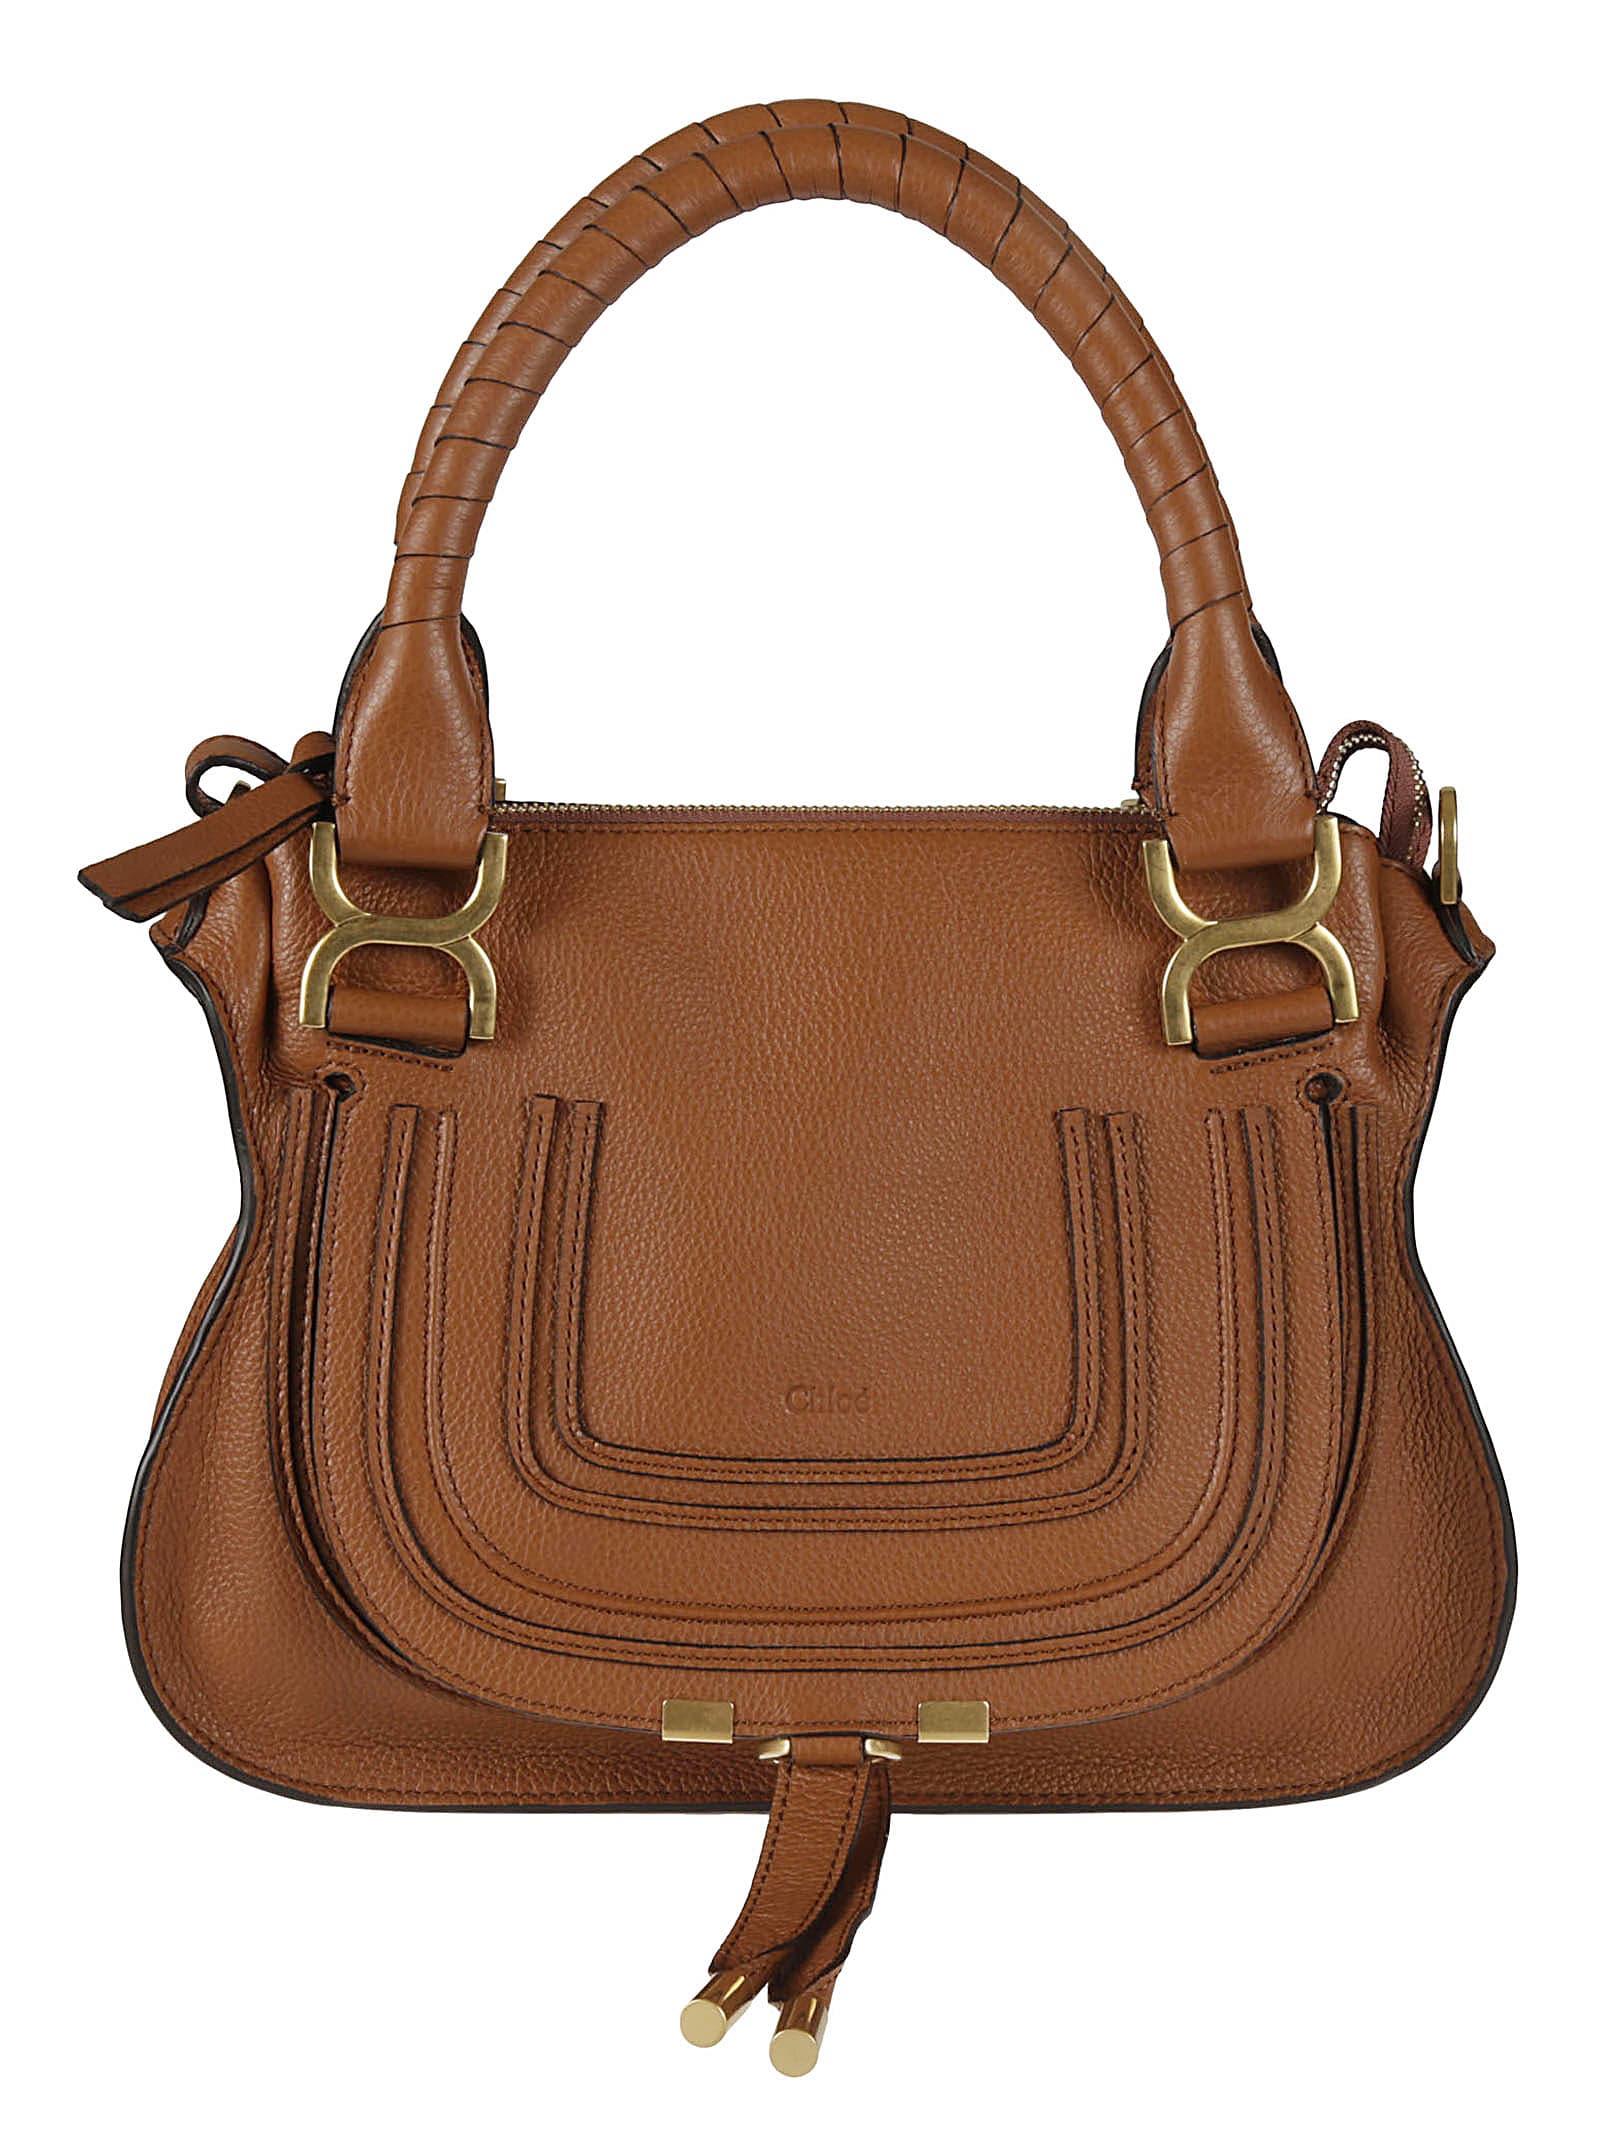 Chloé Small Double Carry Tote